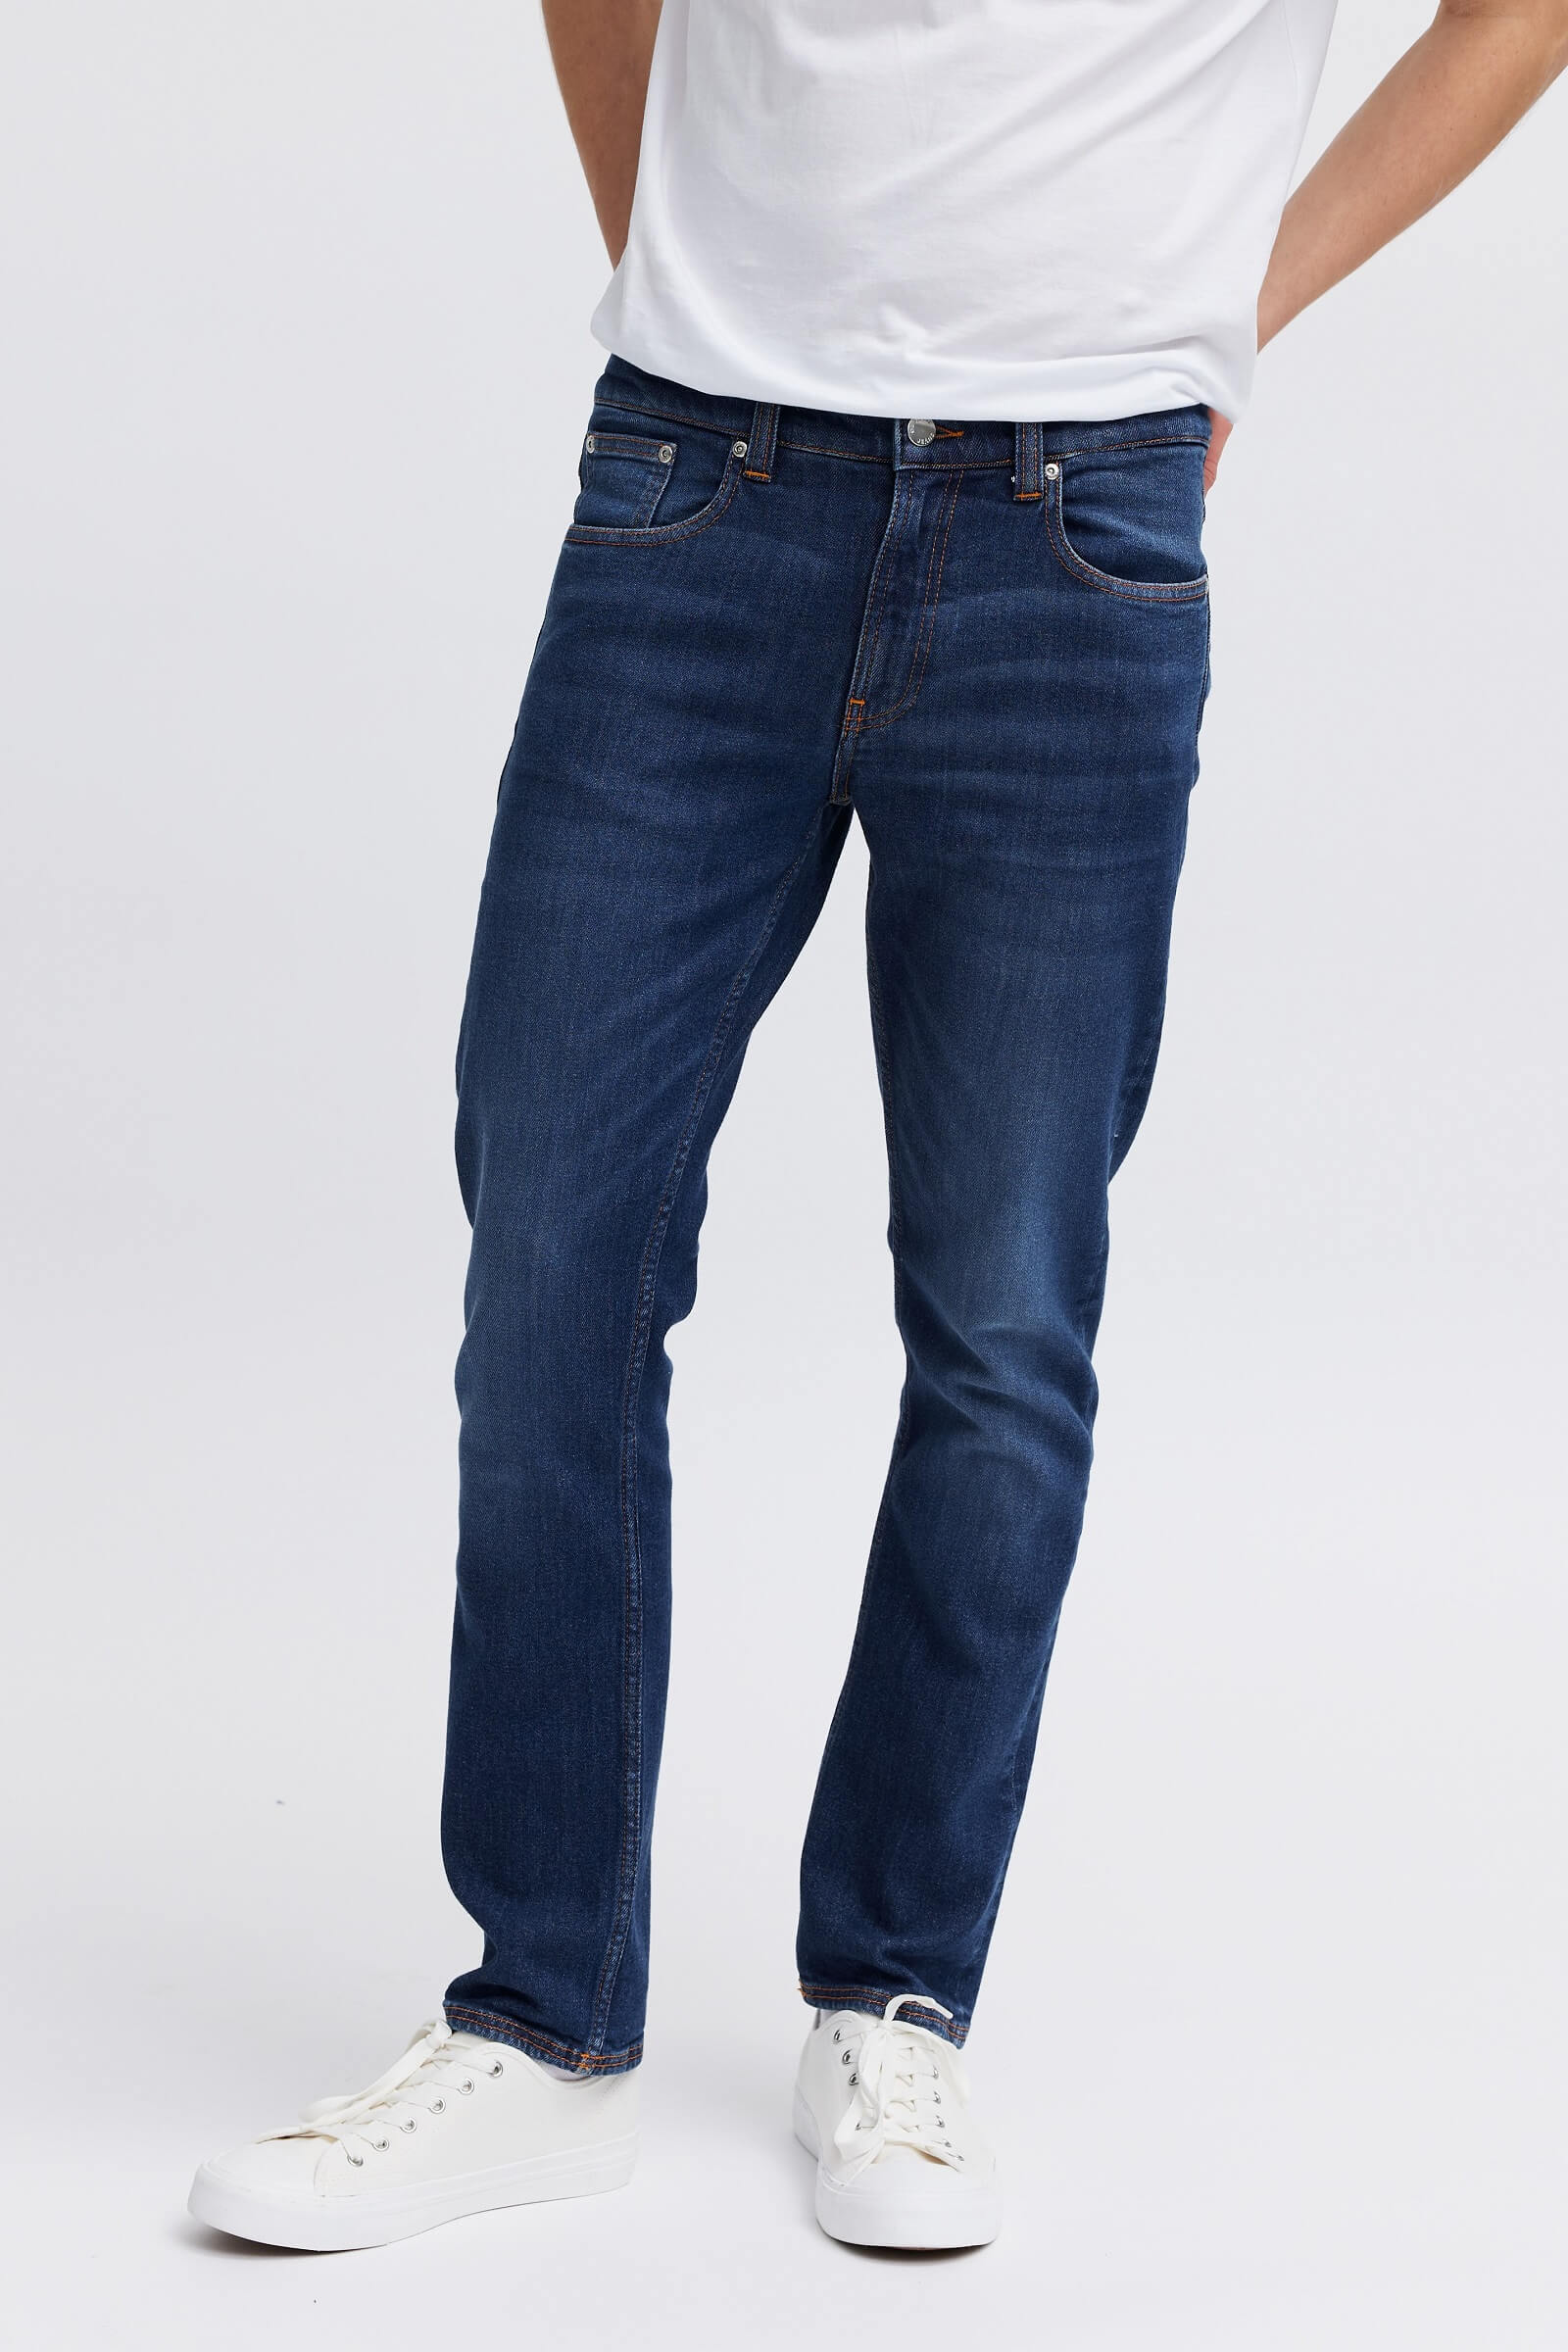 Sustainable comfy jeans for men 